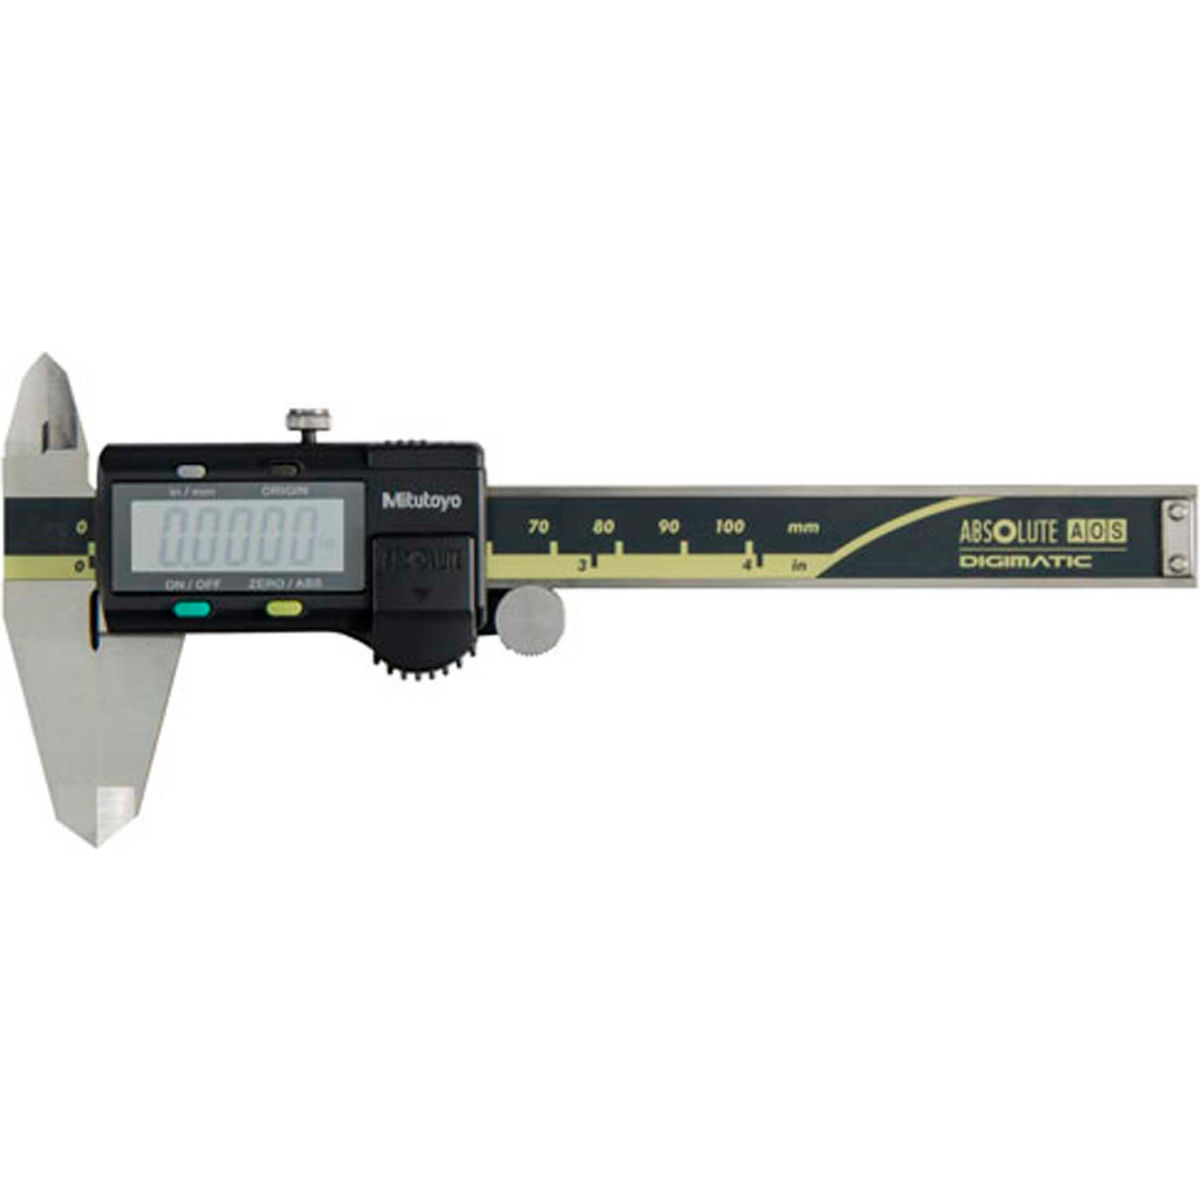 B611875 500-170-30 Digimatic 0-4 in. & 100 mm Stainless Steel Digital Caliper with Data Output -  Mitutoyo America